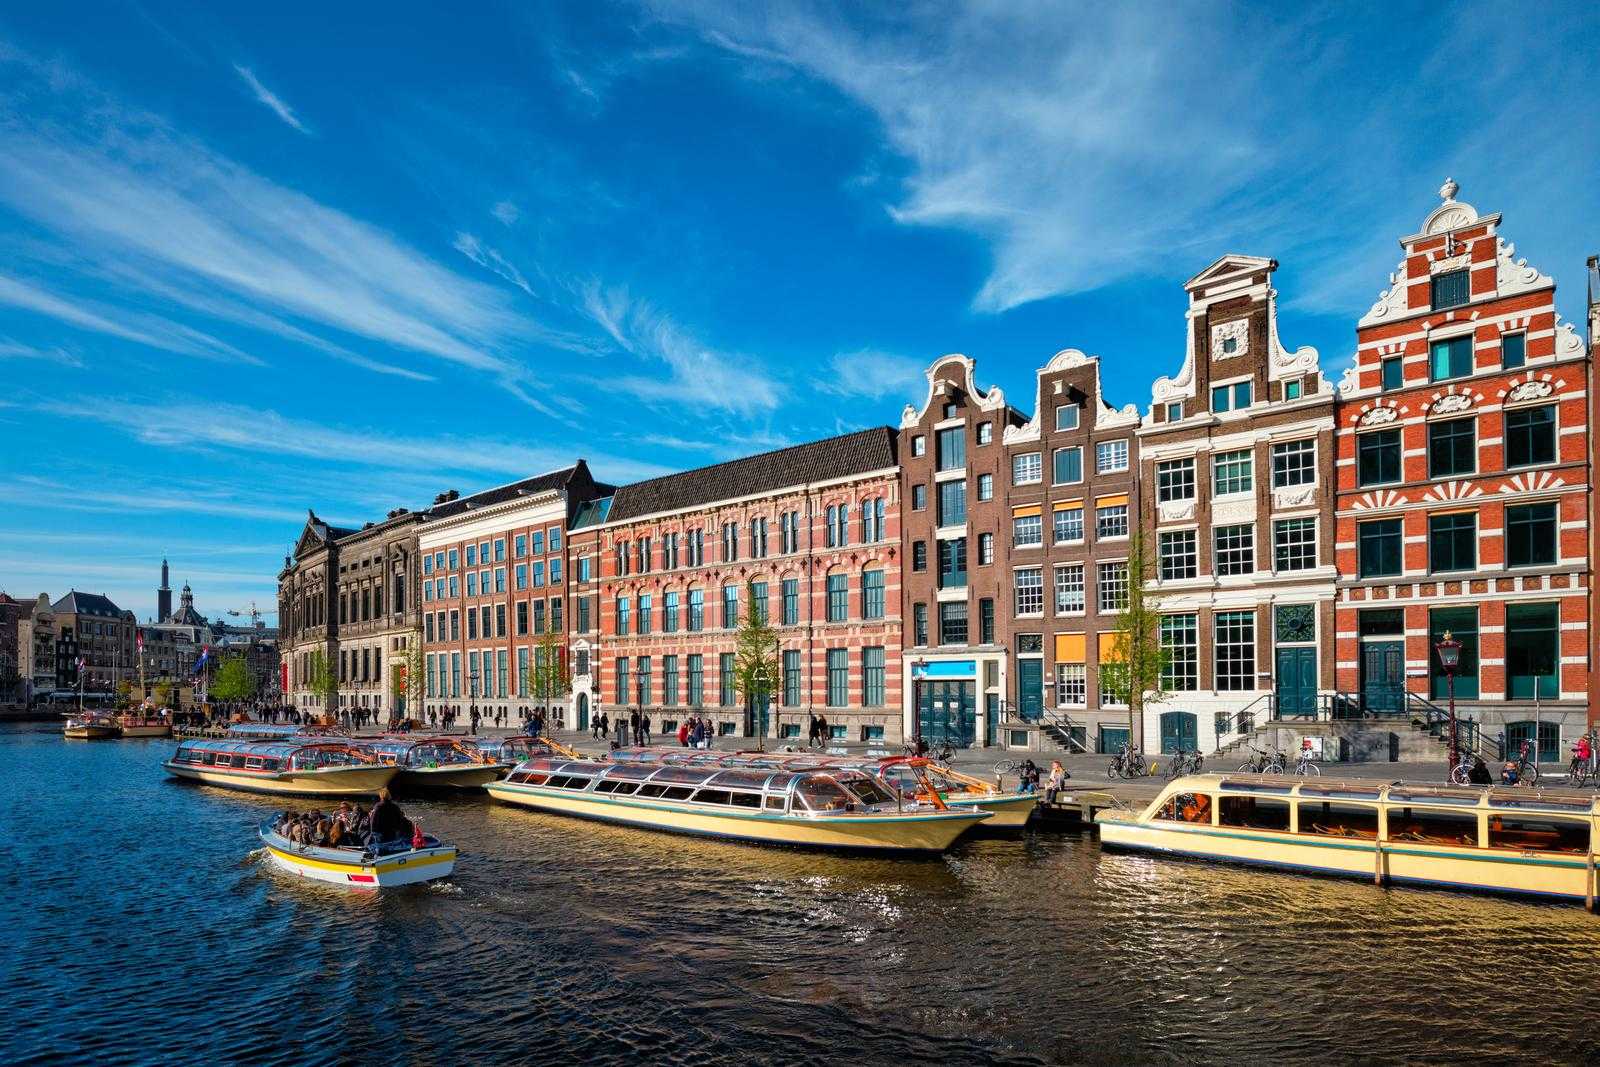 Amsterdam Canal Drinking Cruise - What options do you have